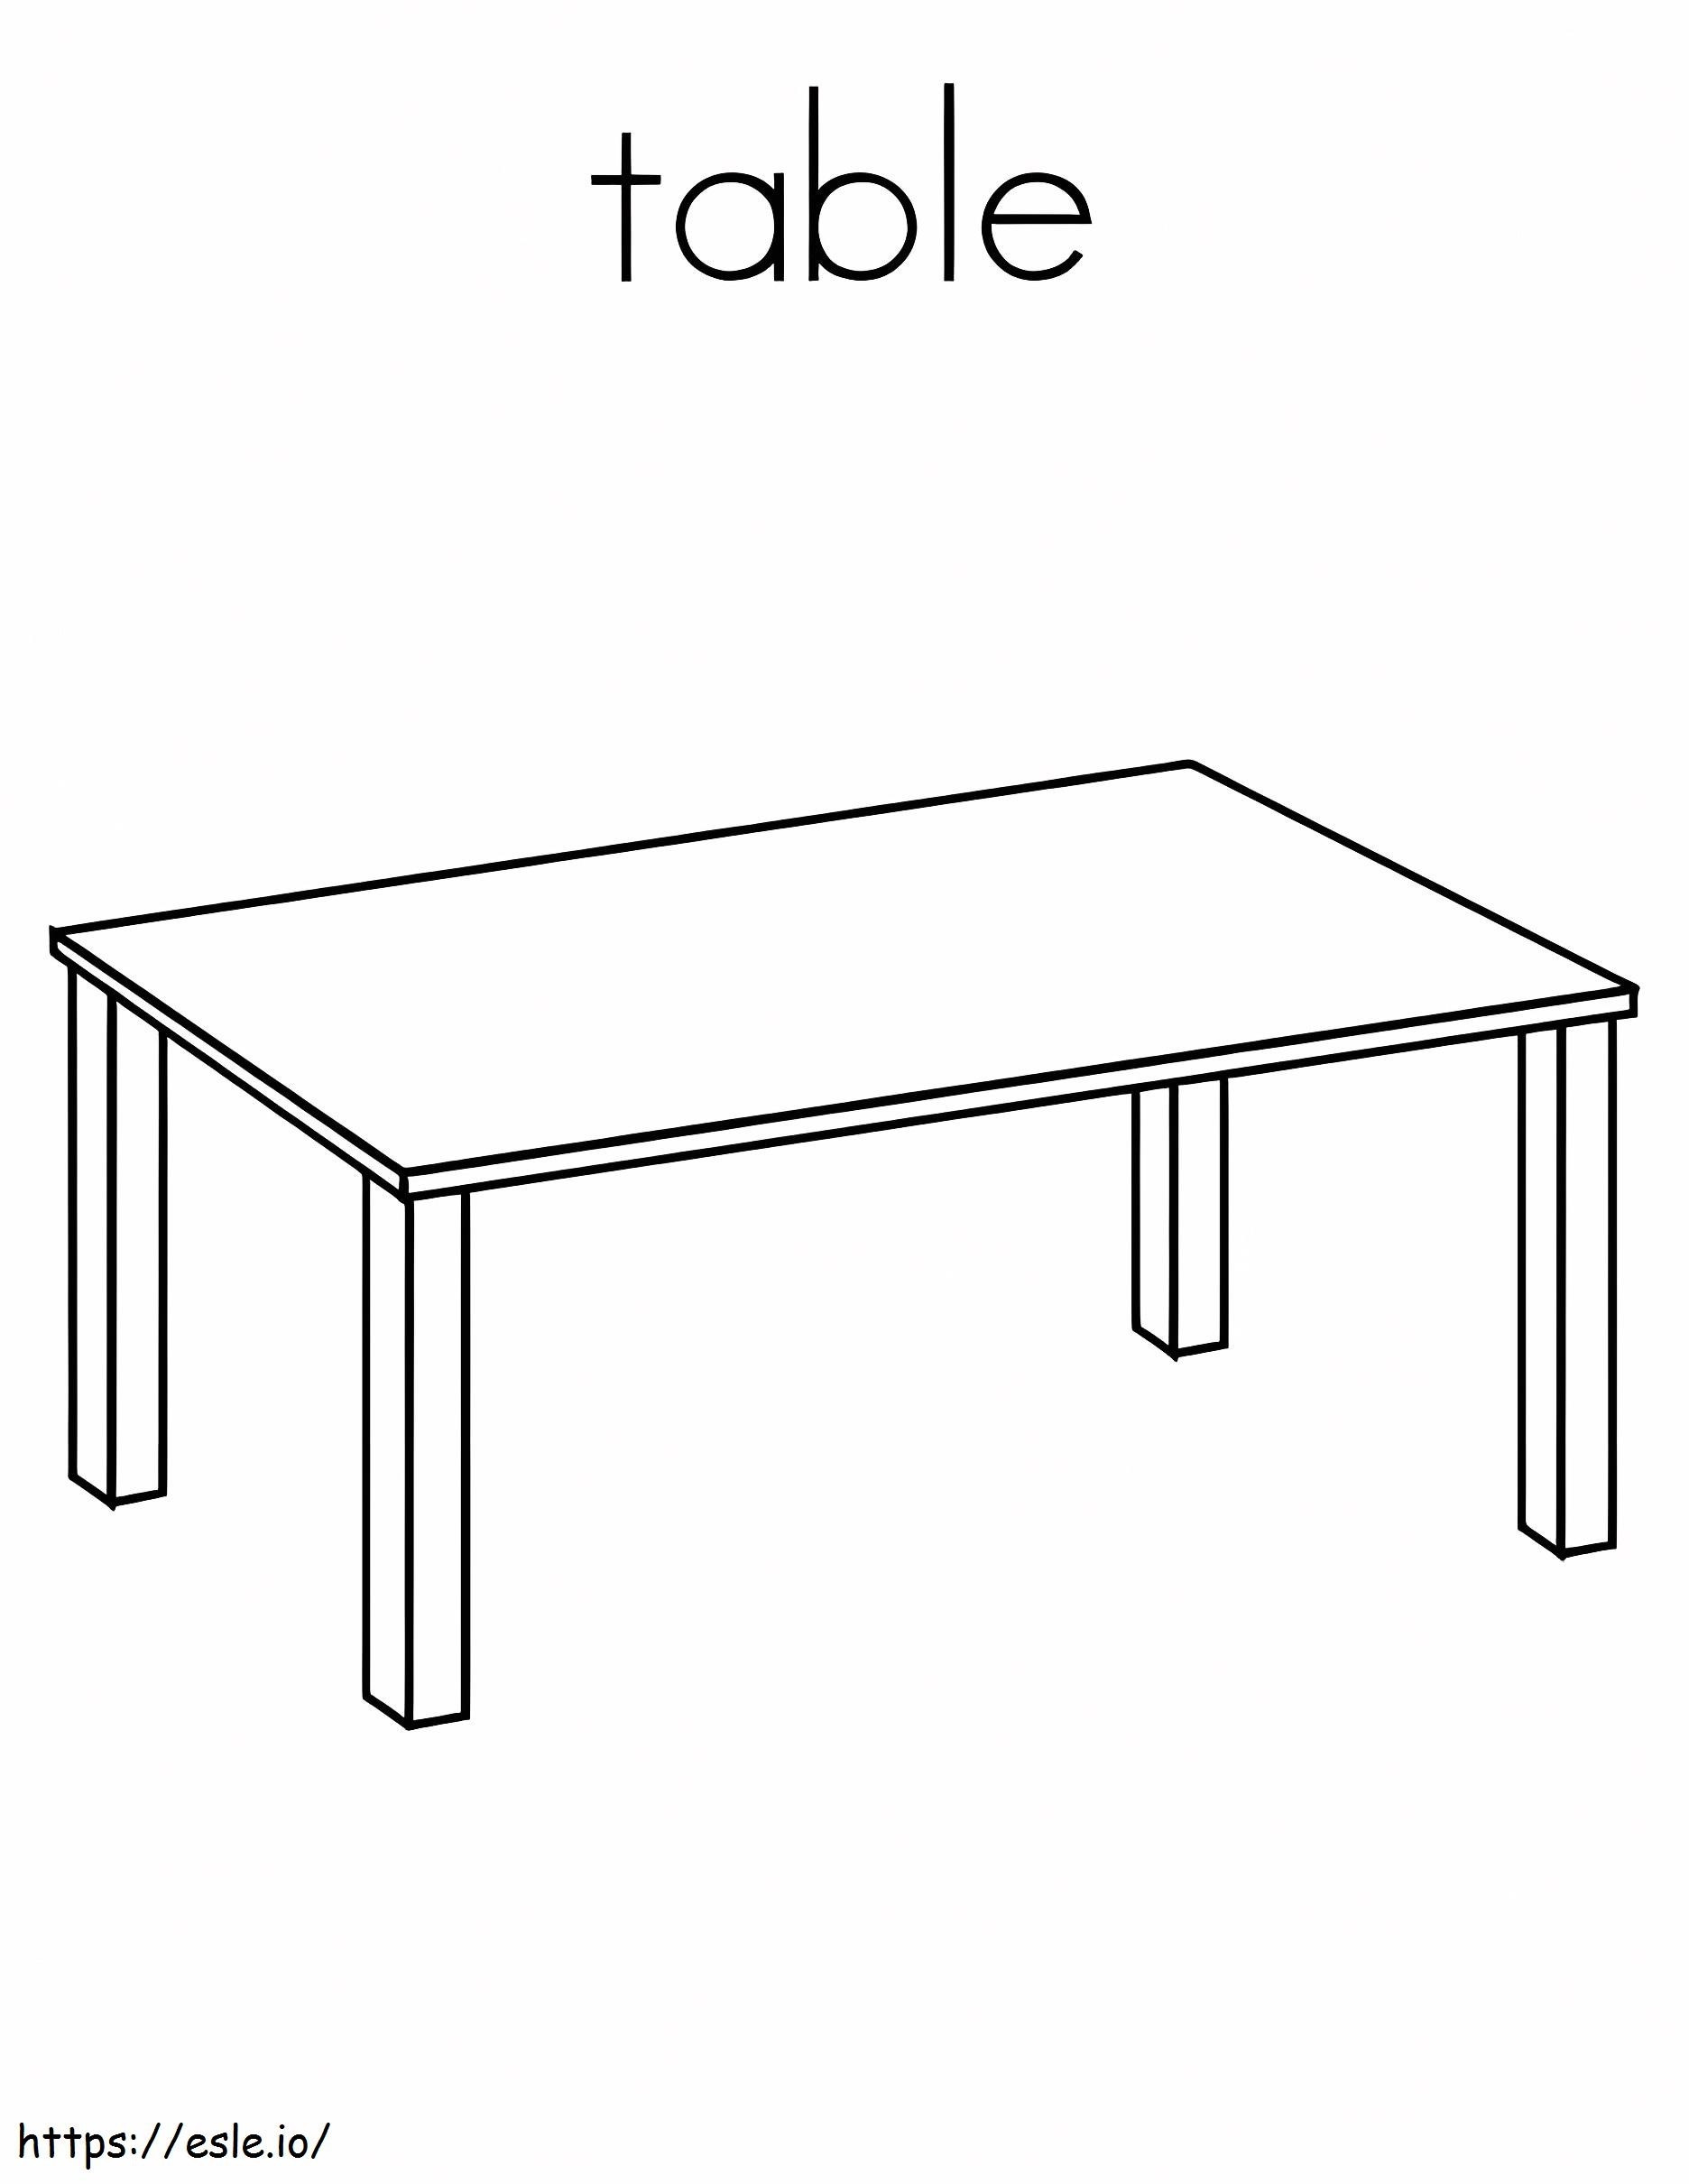 Easy Table coloring page